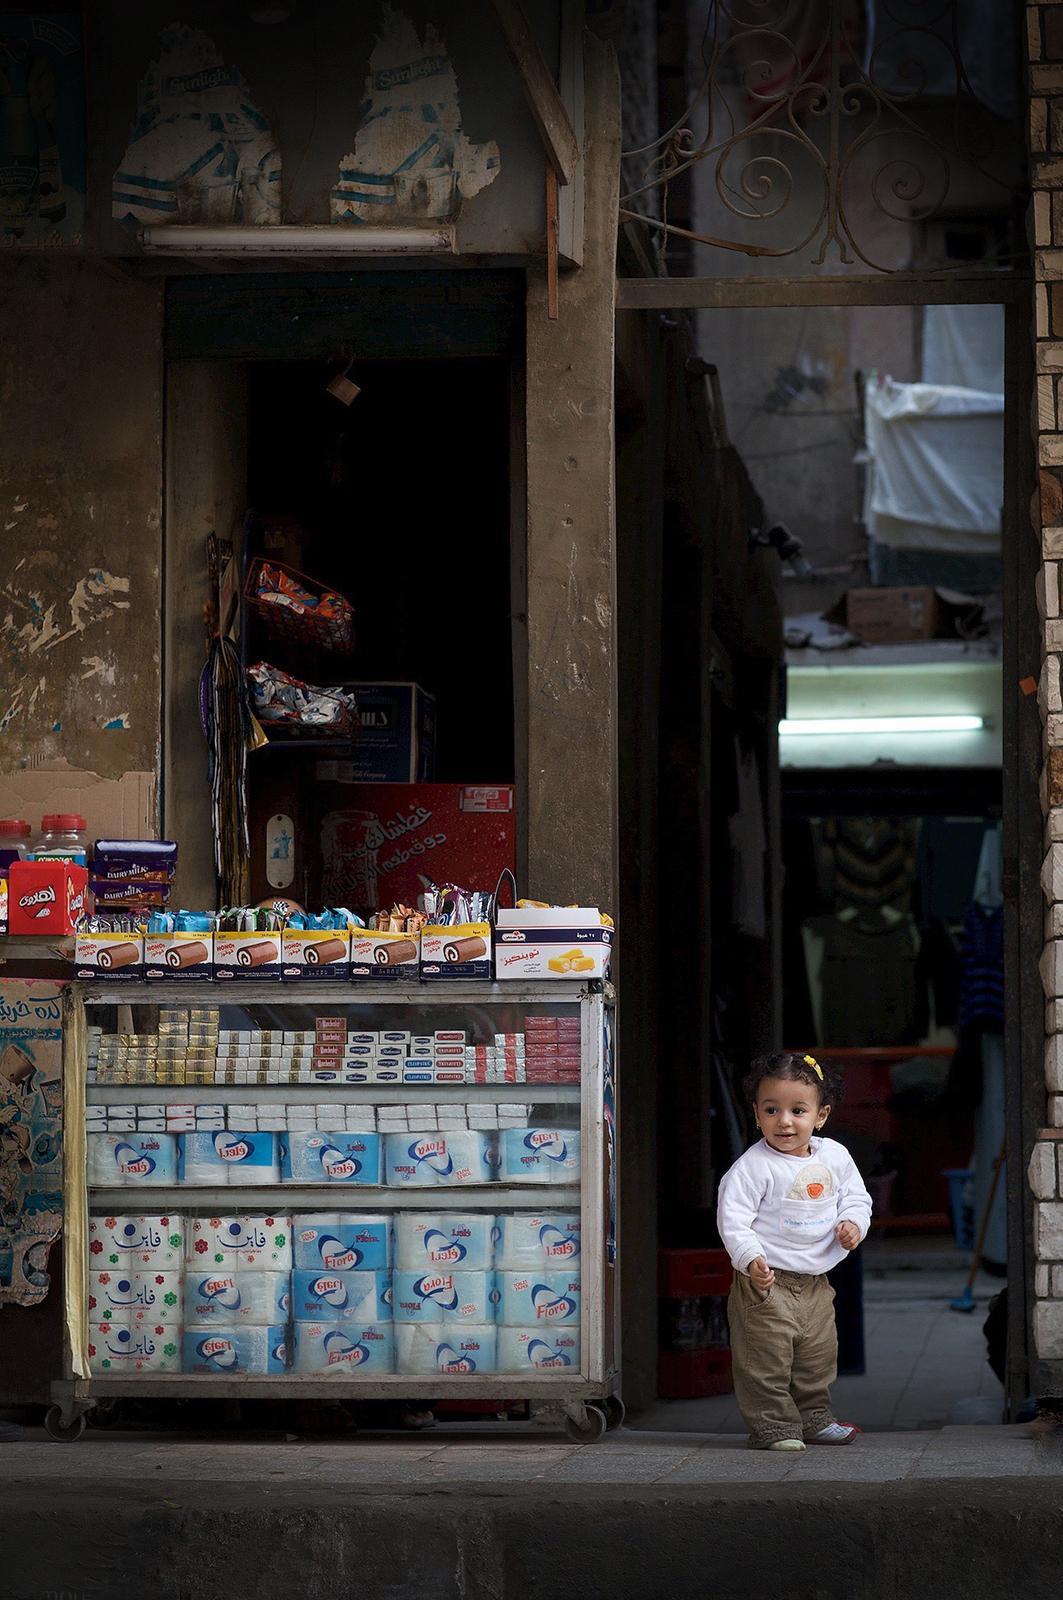 Copts 02 - Signed limited edition archival pigment print, 2012    -  Edition of 5

Little girl at the entrance of a store, in the Coptic Cairo, Egypt, which is a part of Old Cairo which encompasses the Babylon Fortress, the Coptic Museum, the